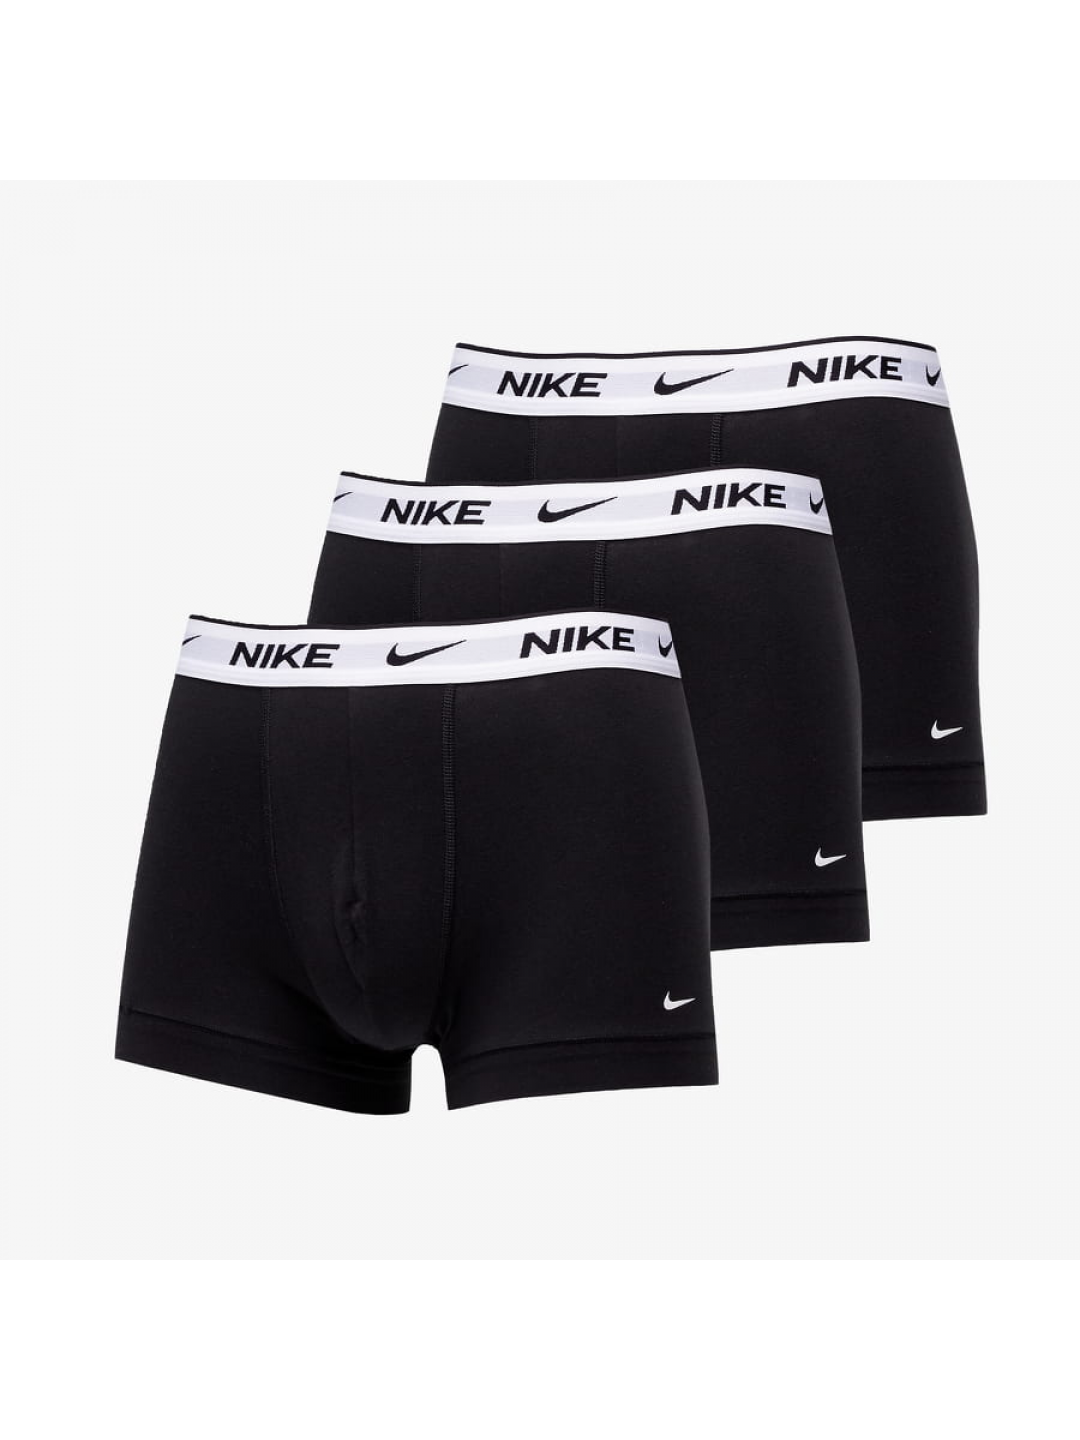 Nike Everyday Cotton Stretch Trunk 3-Pack Black White